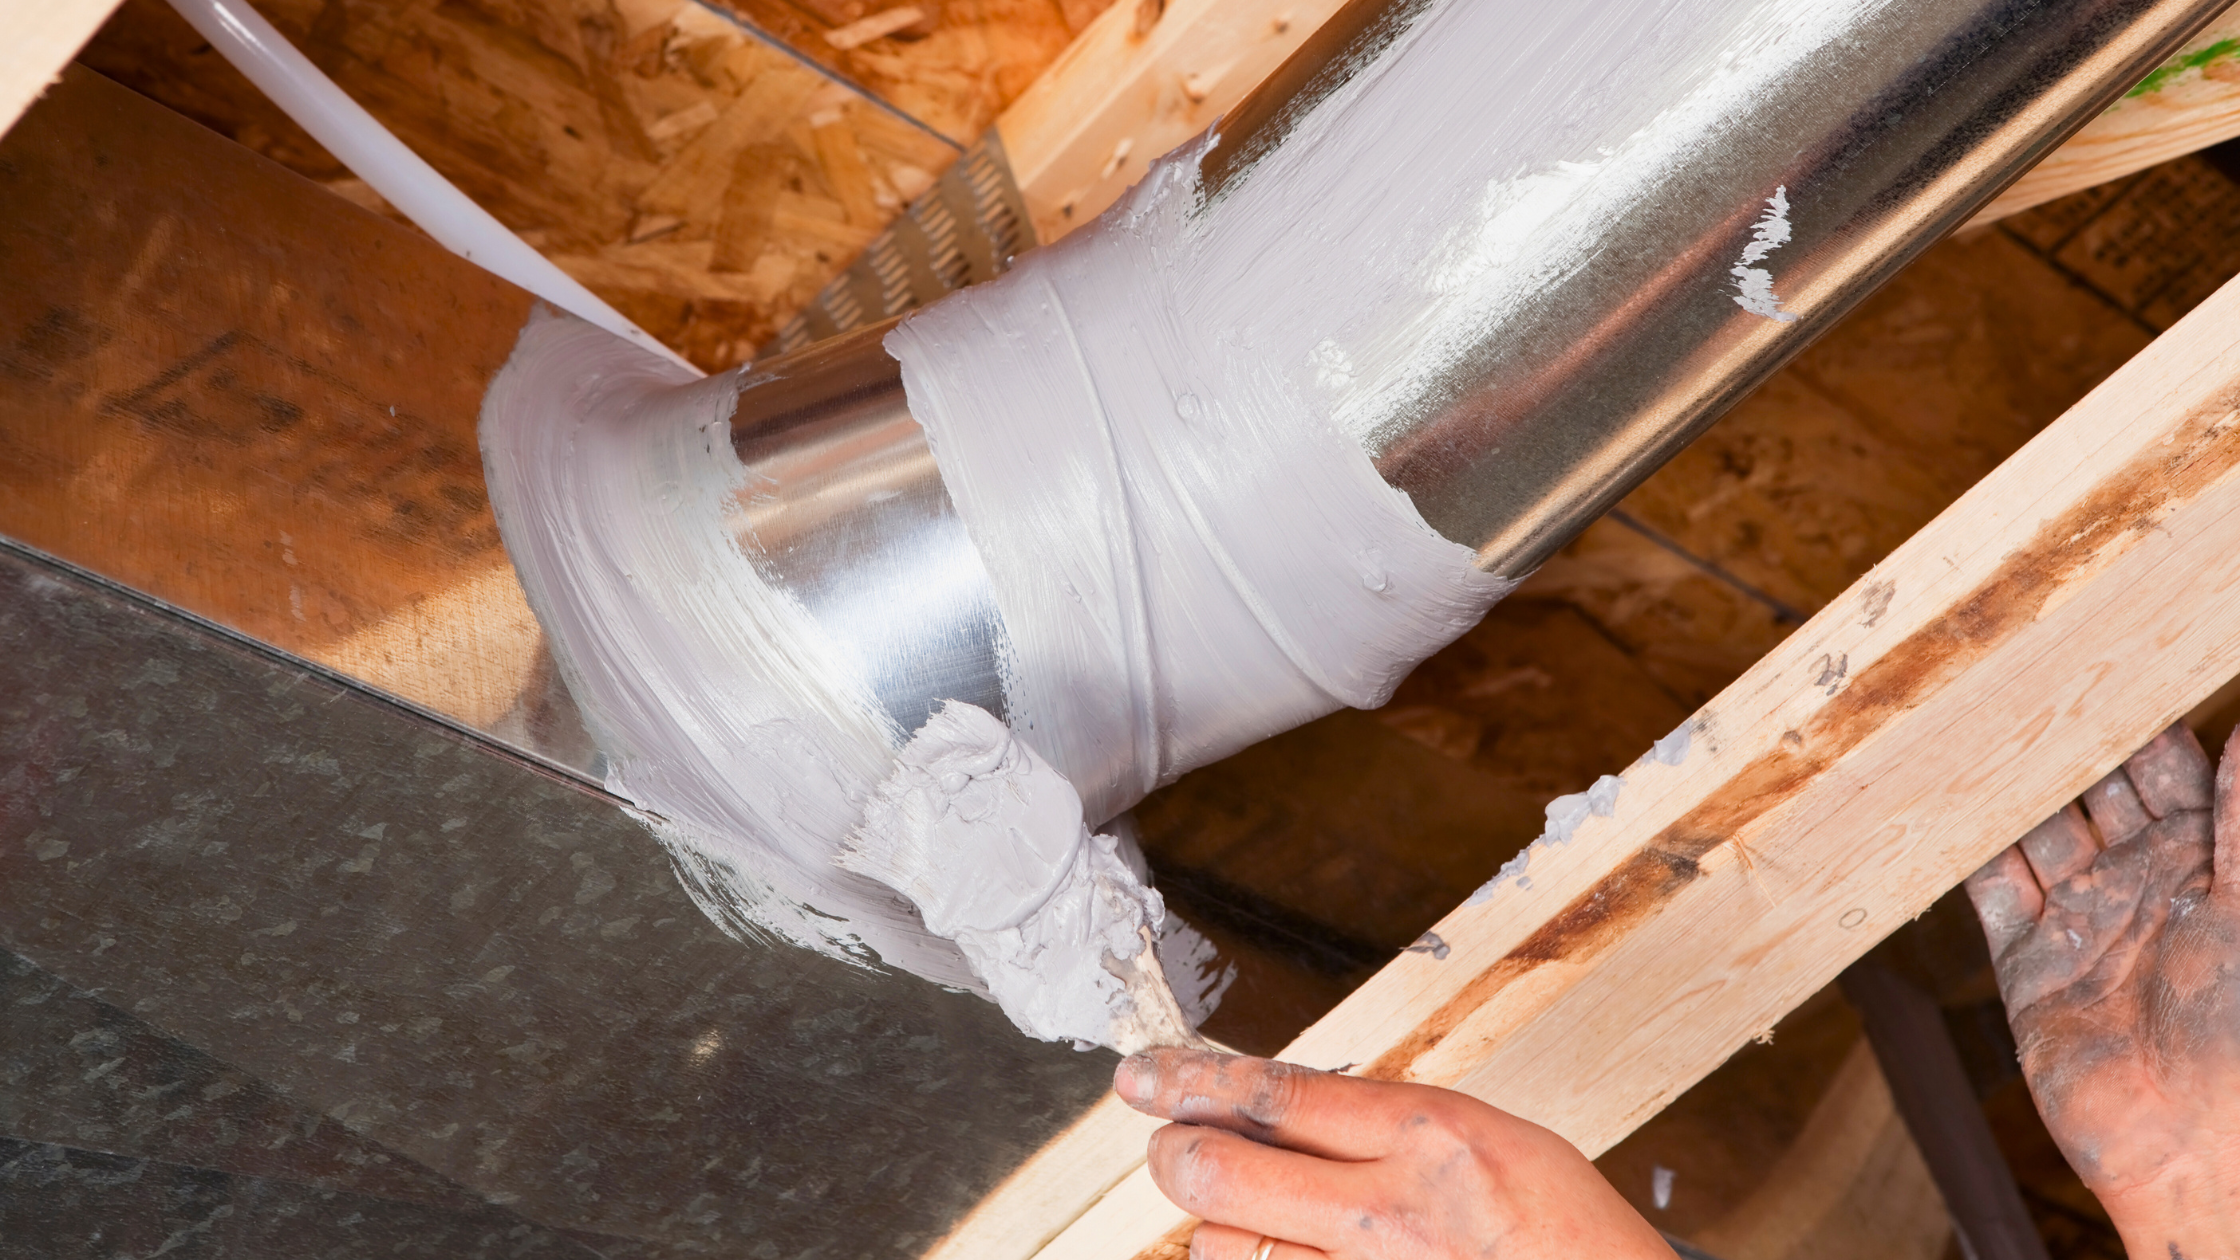 How to find and fix air leaks in your home - Measures that improve indoor comfort and energy efficiency